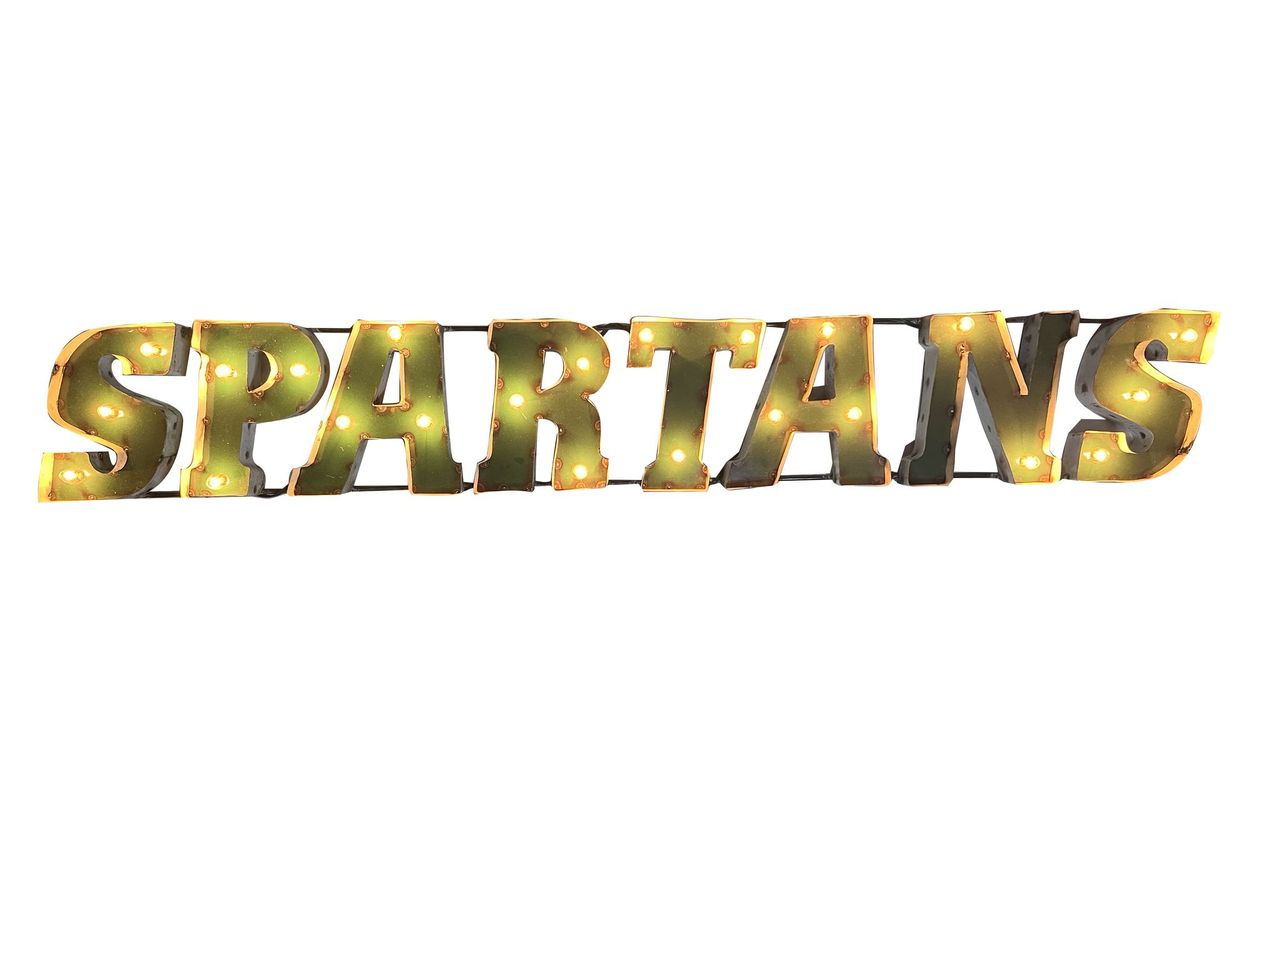 Michigan State "Spartans" Lighted Recycled Wall Decor